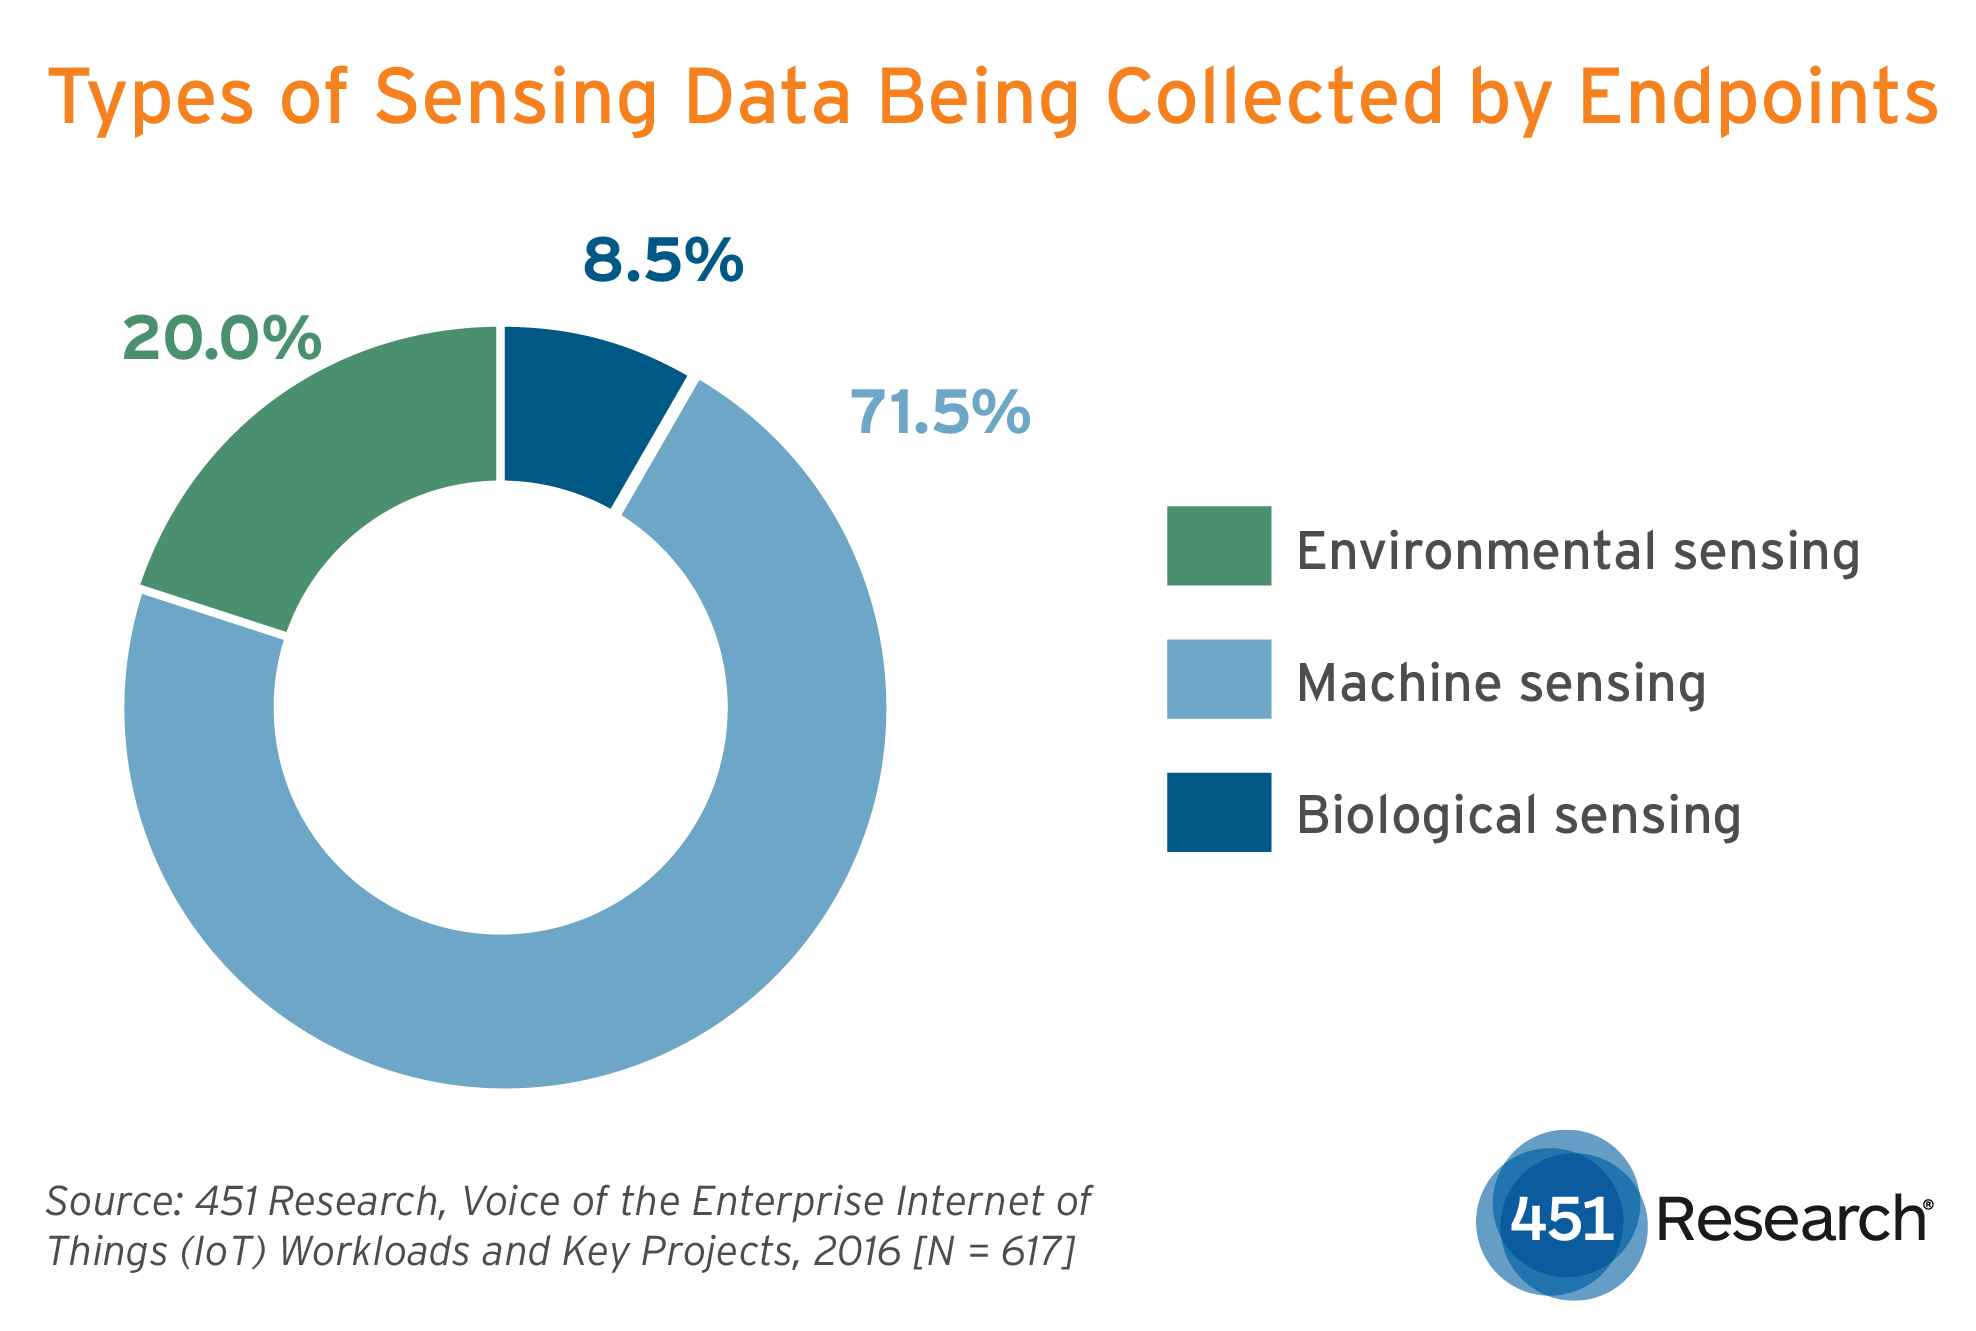 Types of Sensing Data Being Collected by Endpoints